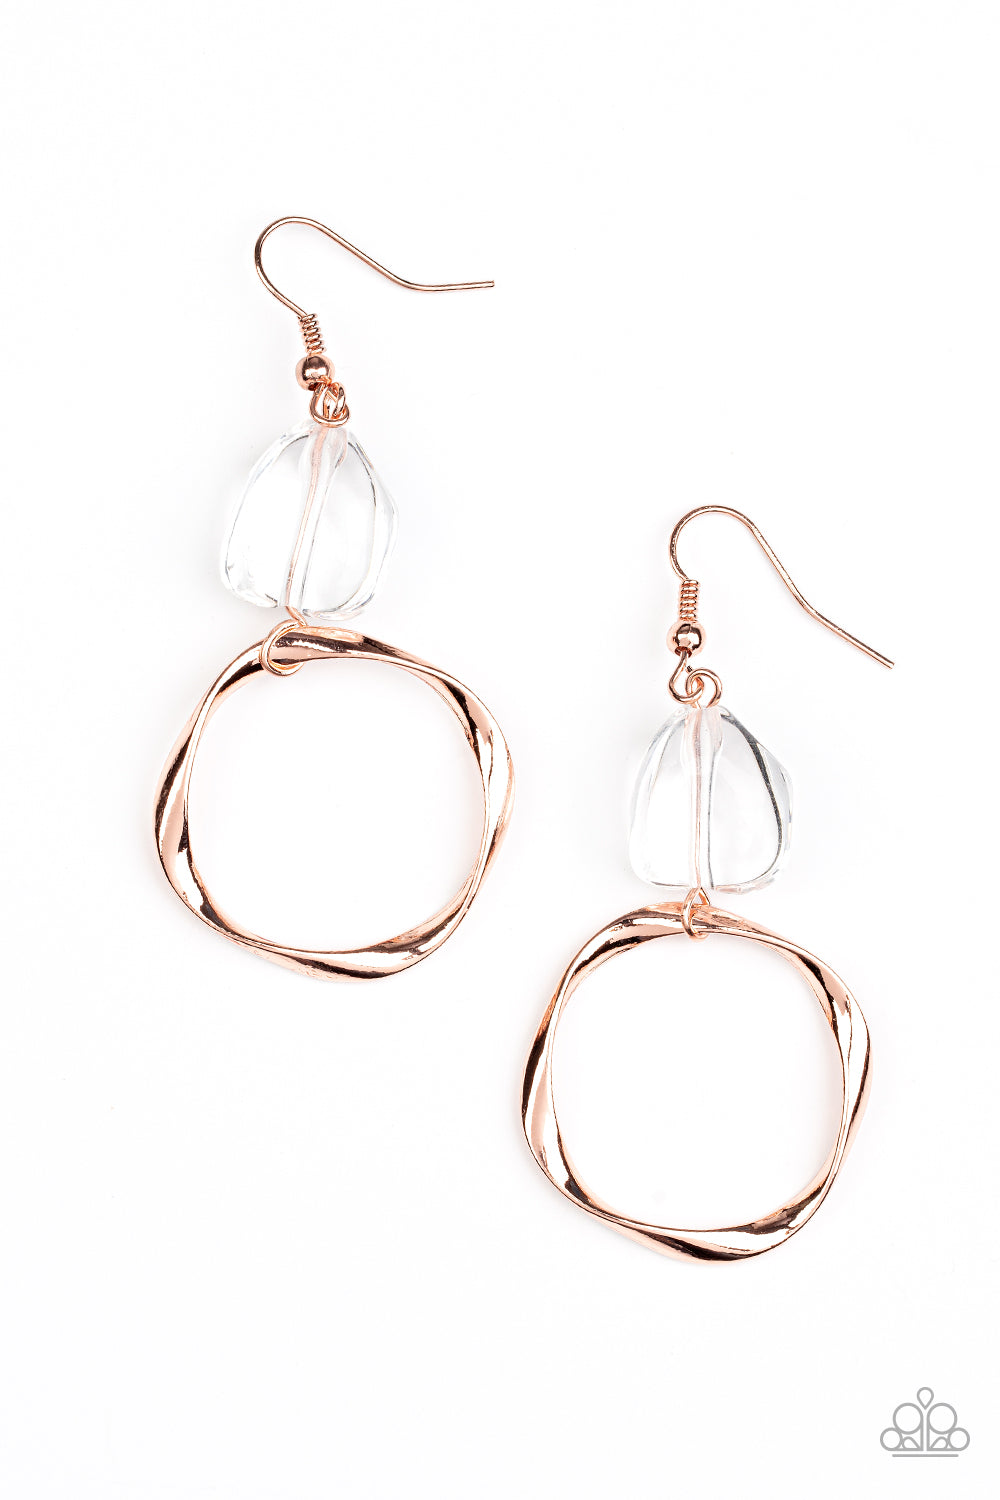 All Clear - Paparazzi - Copper Twisted Hoop Clear Bead Earrings